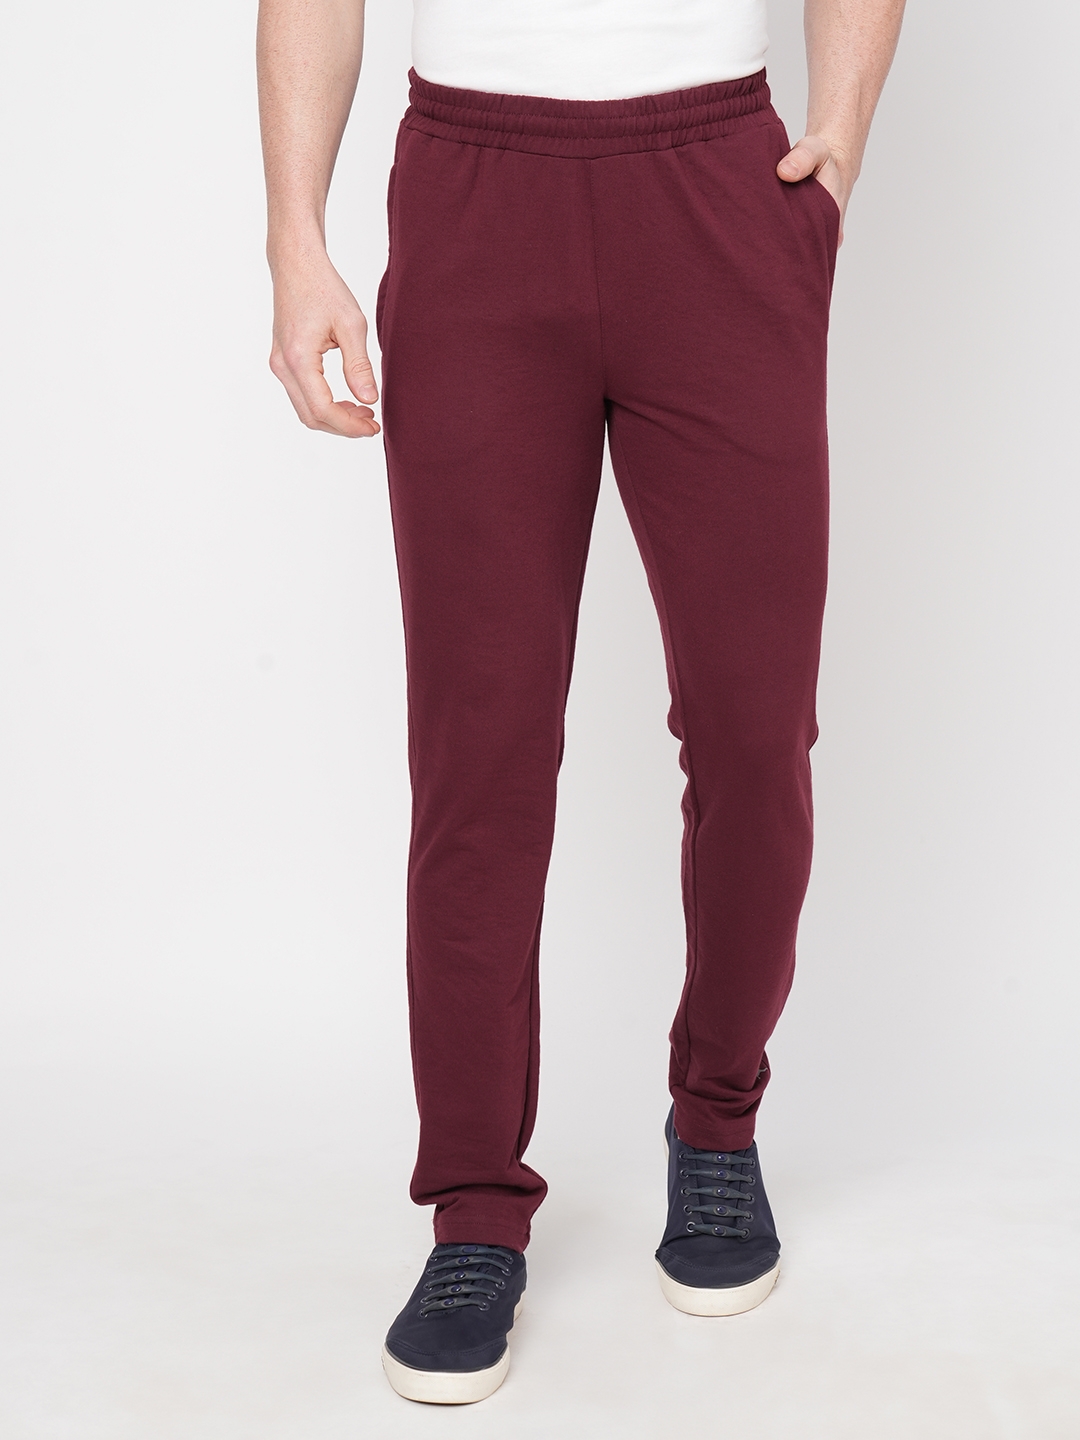 Men's Slim Fit Wine Red Cotton Blend Casual Joogers